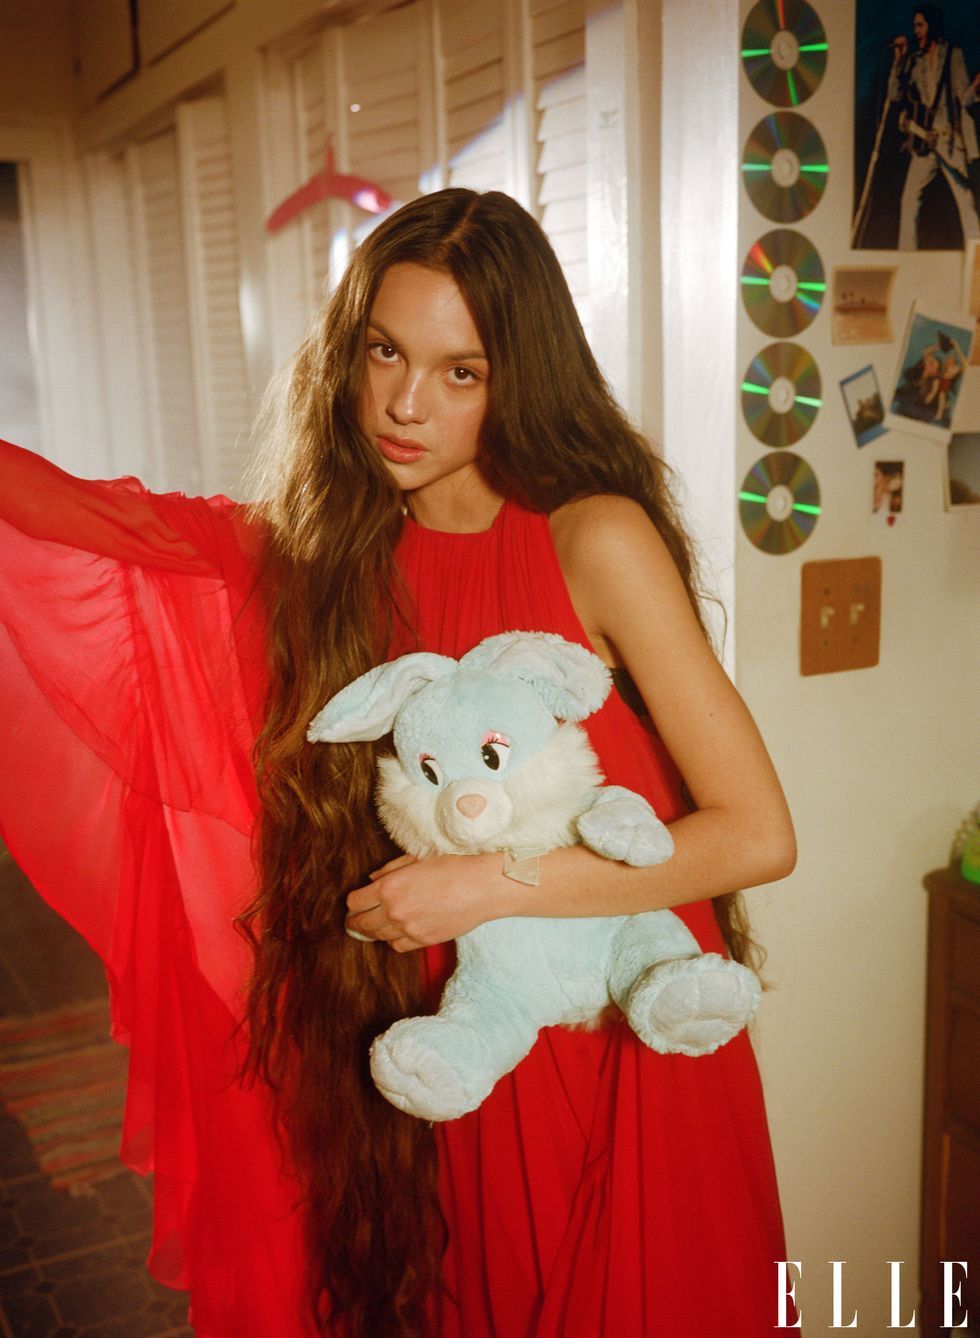 olivia rodrigo, in a diaphopnous red ball gown, clutches a pale blue stuffed bunny